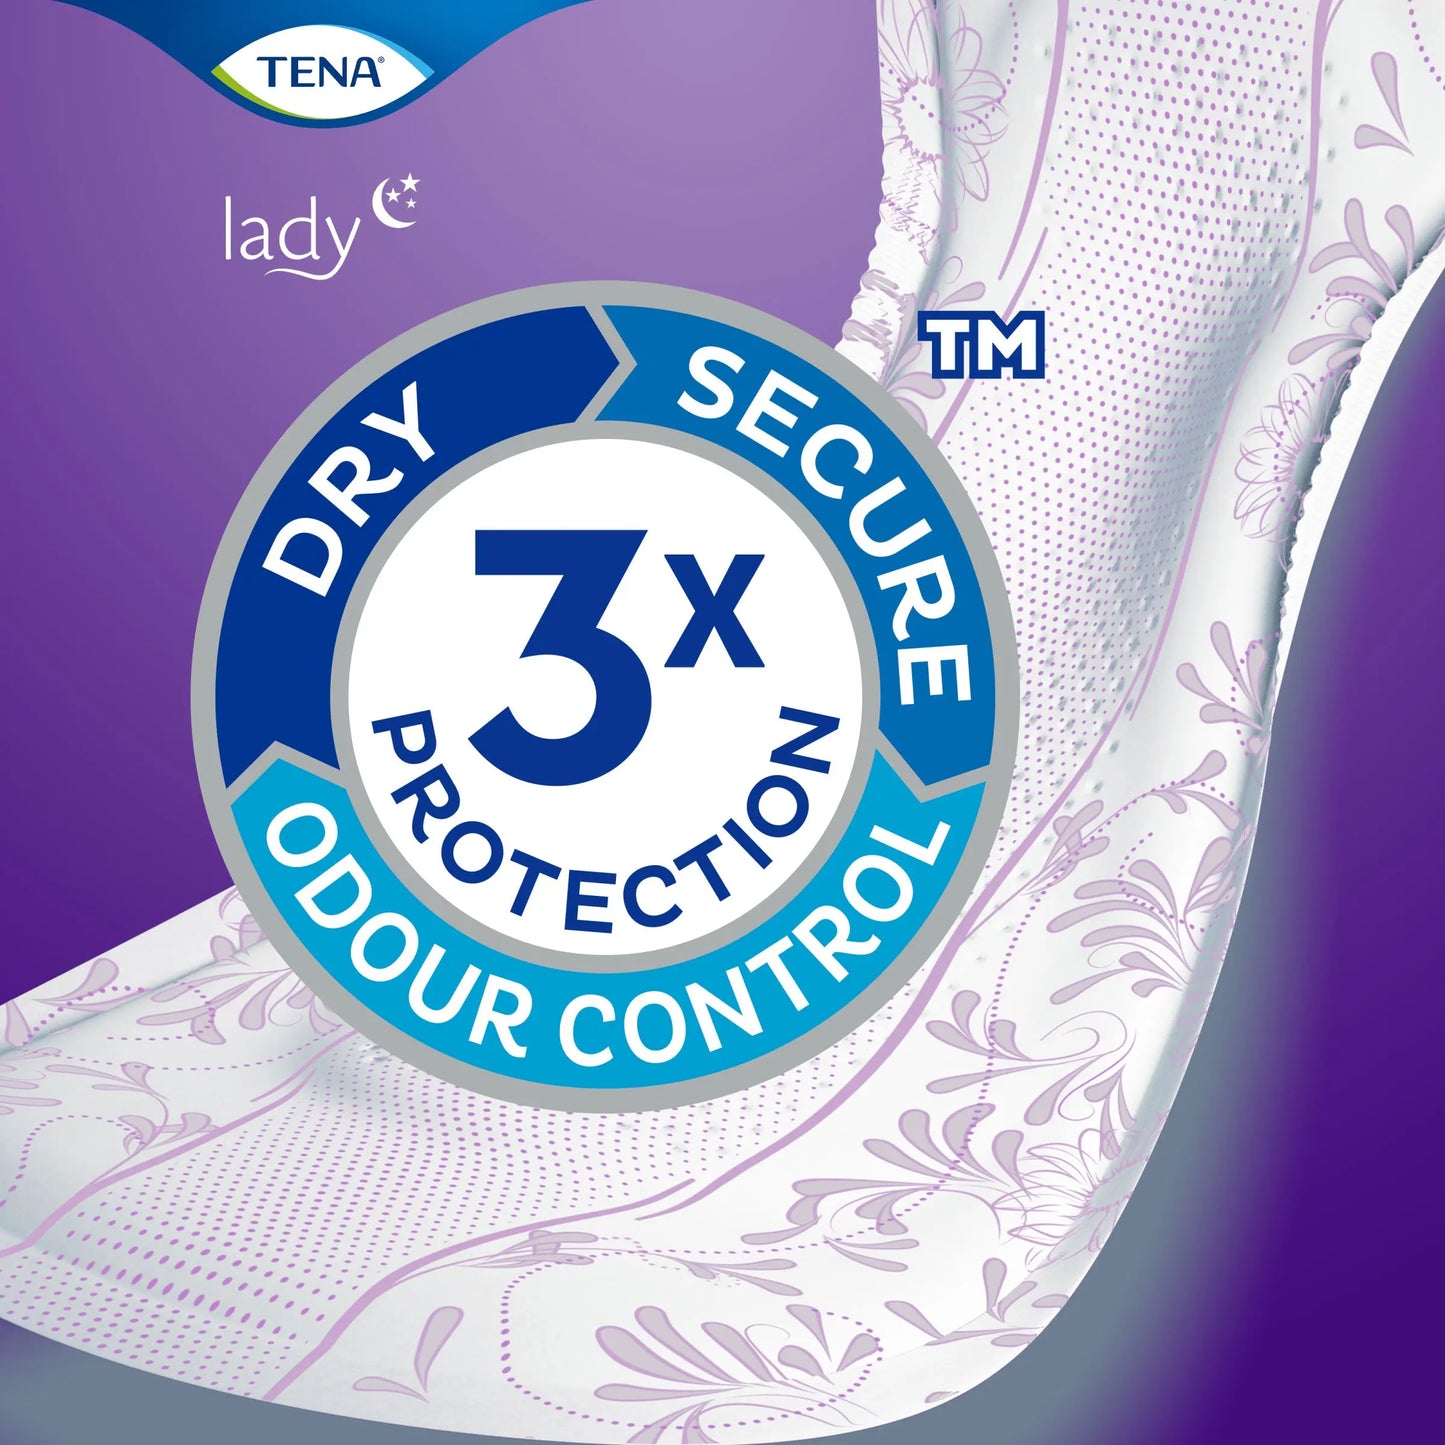 Tena Lady Maxi Night 6 Pads Odor Control 3X protection, Wider pack TENA